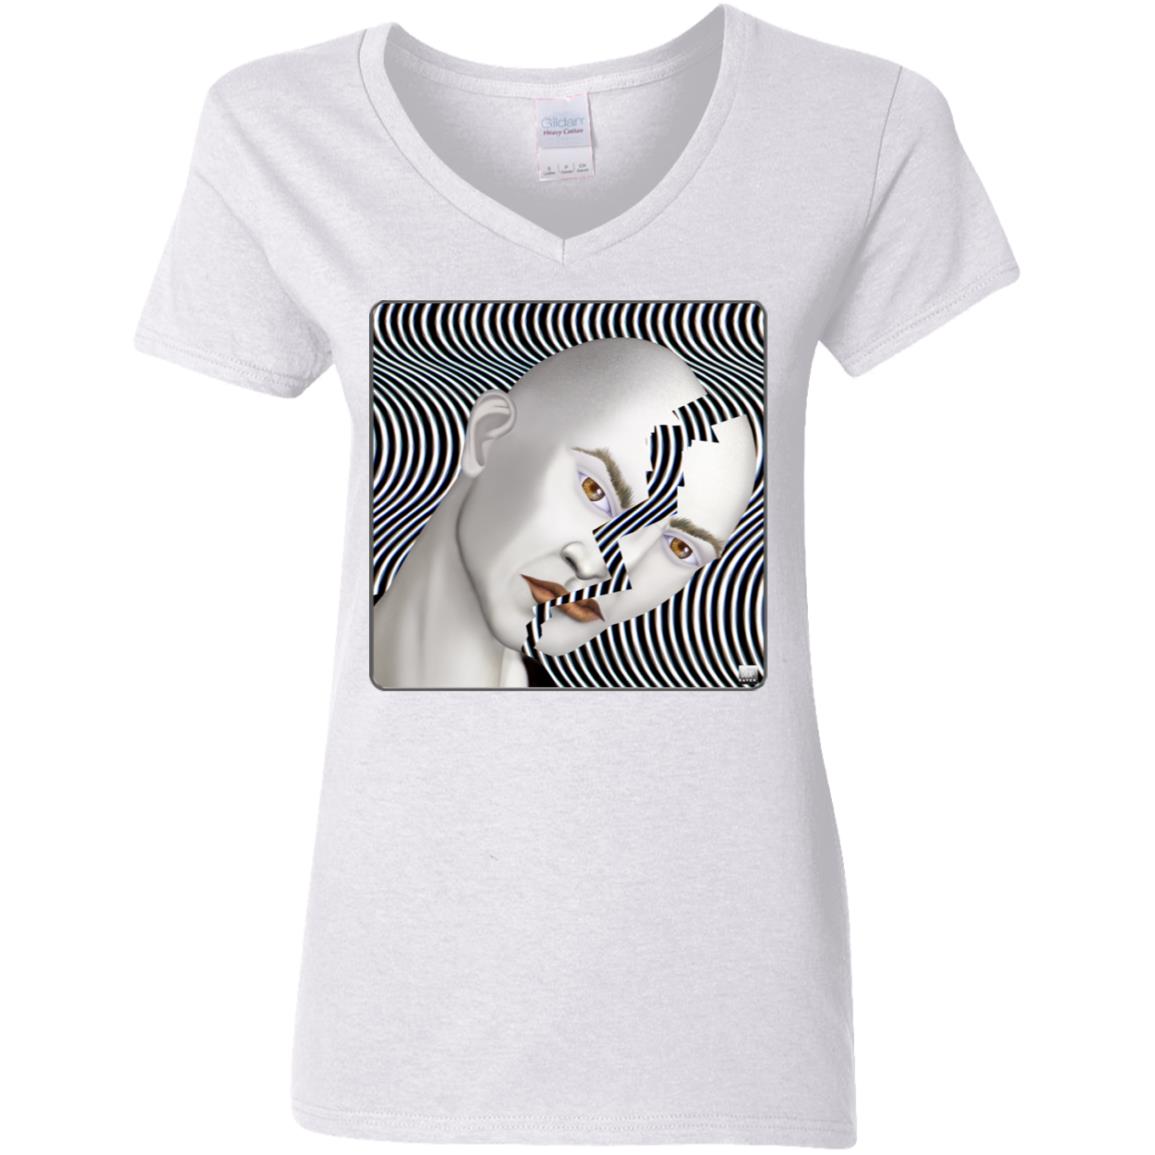 Cracked Before Coffee - Women's V-Neck T Shirt